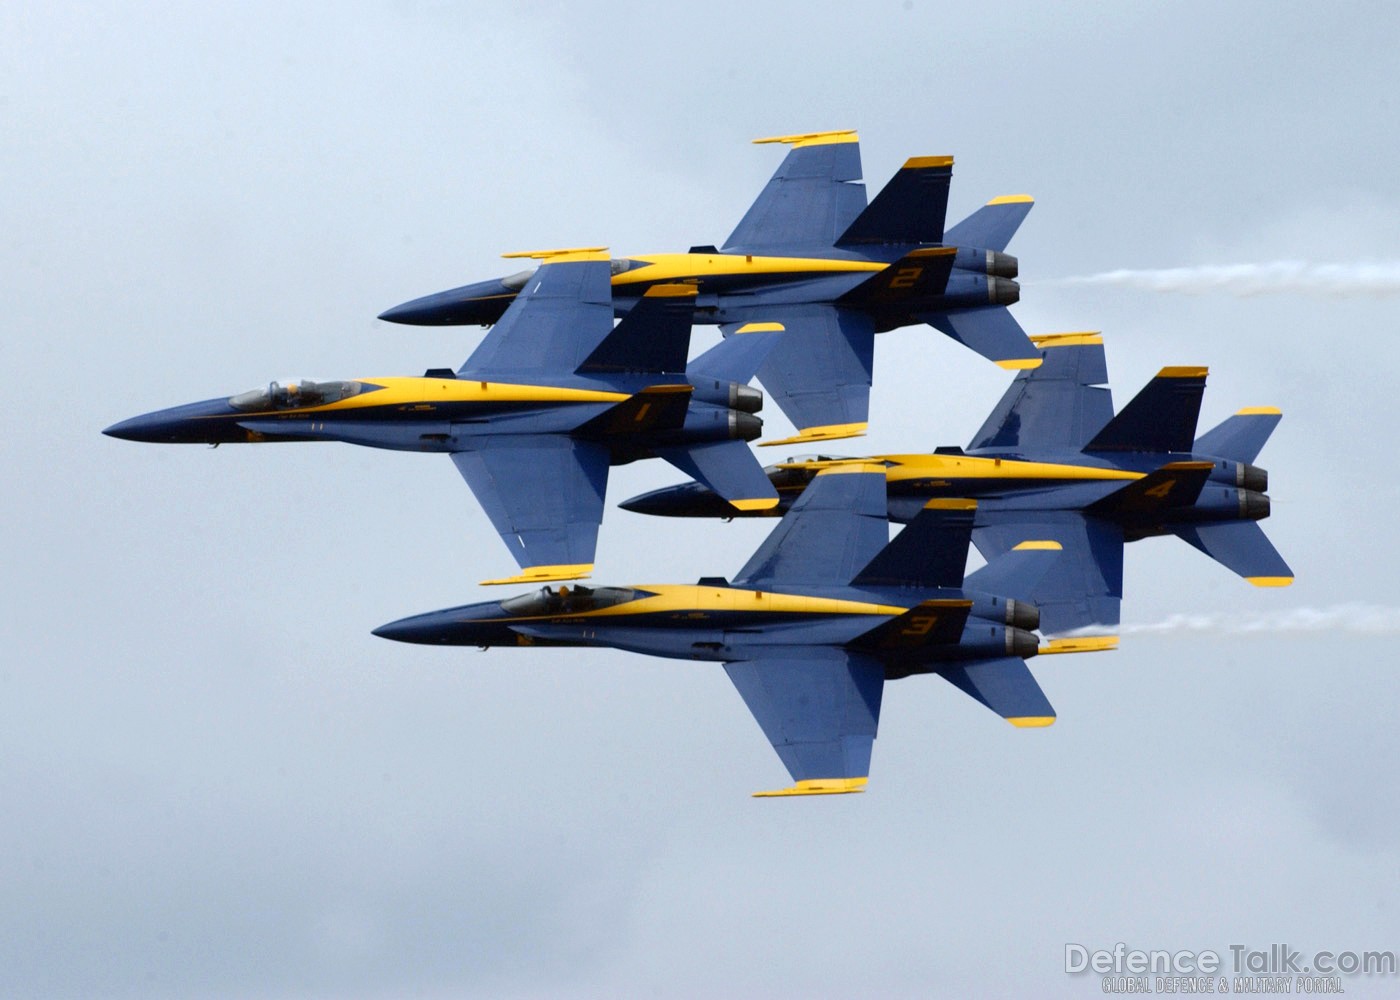 F/A-18 Hornets - Blue Angels, US Navy